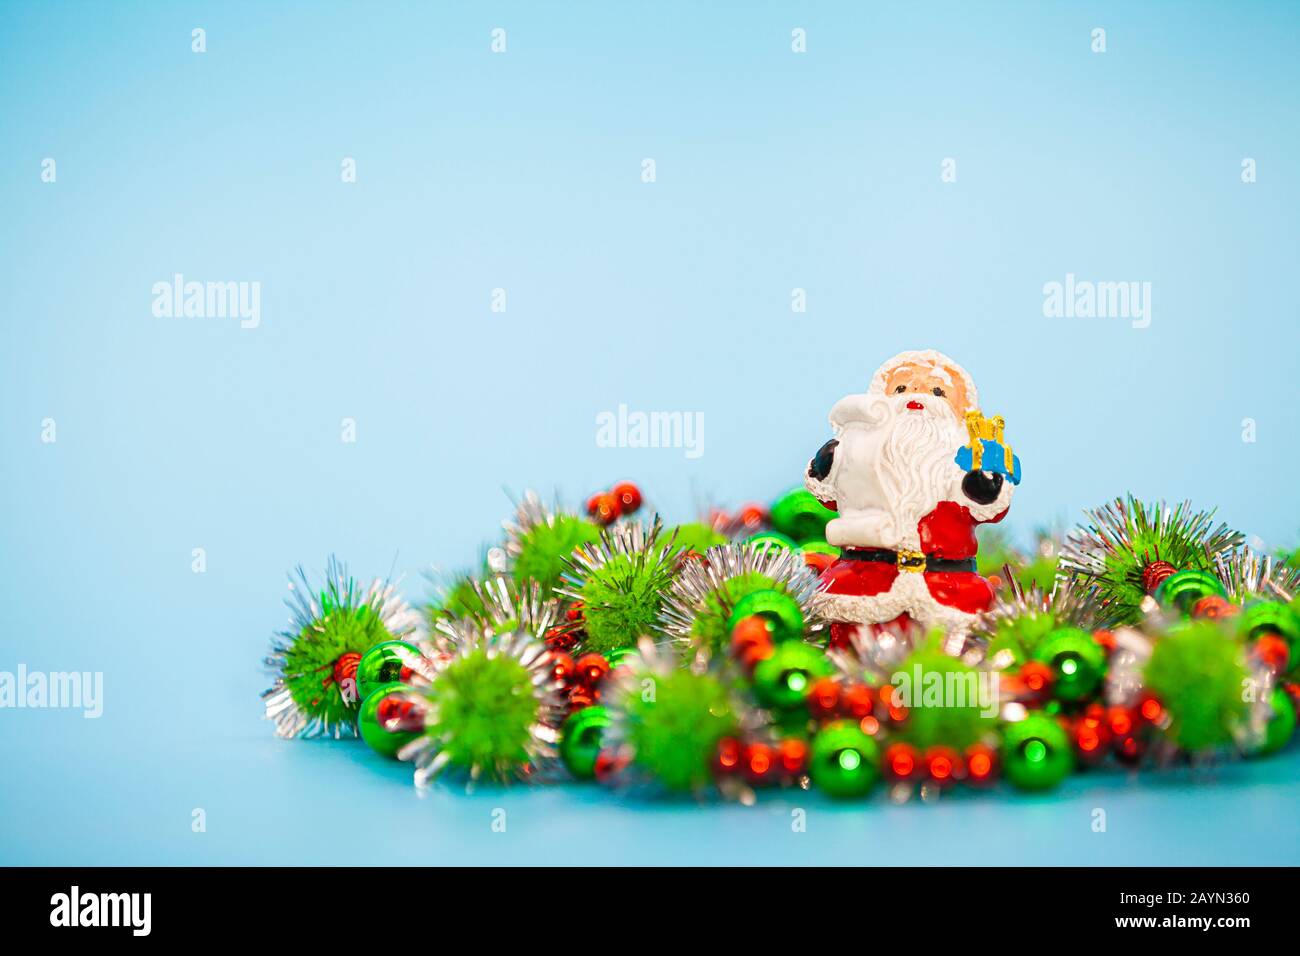 Ornamental Santa clause sat within Christmas beads and tinsel against a white background. Stock Photo